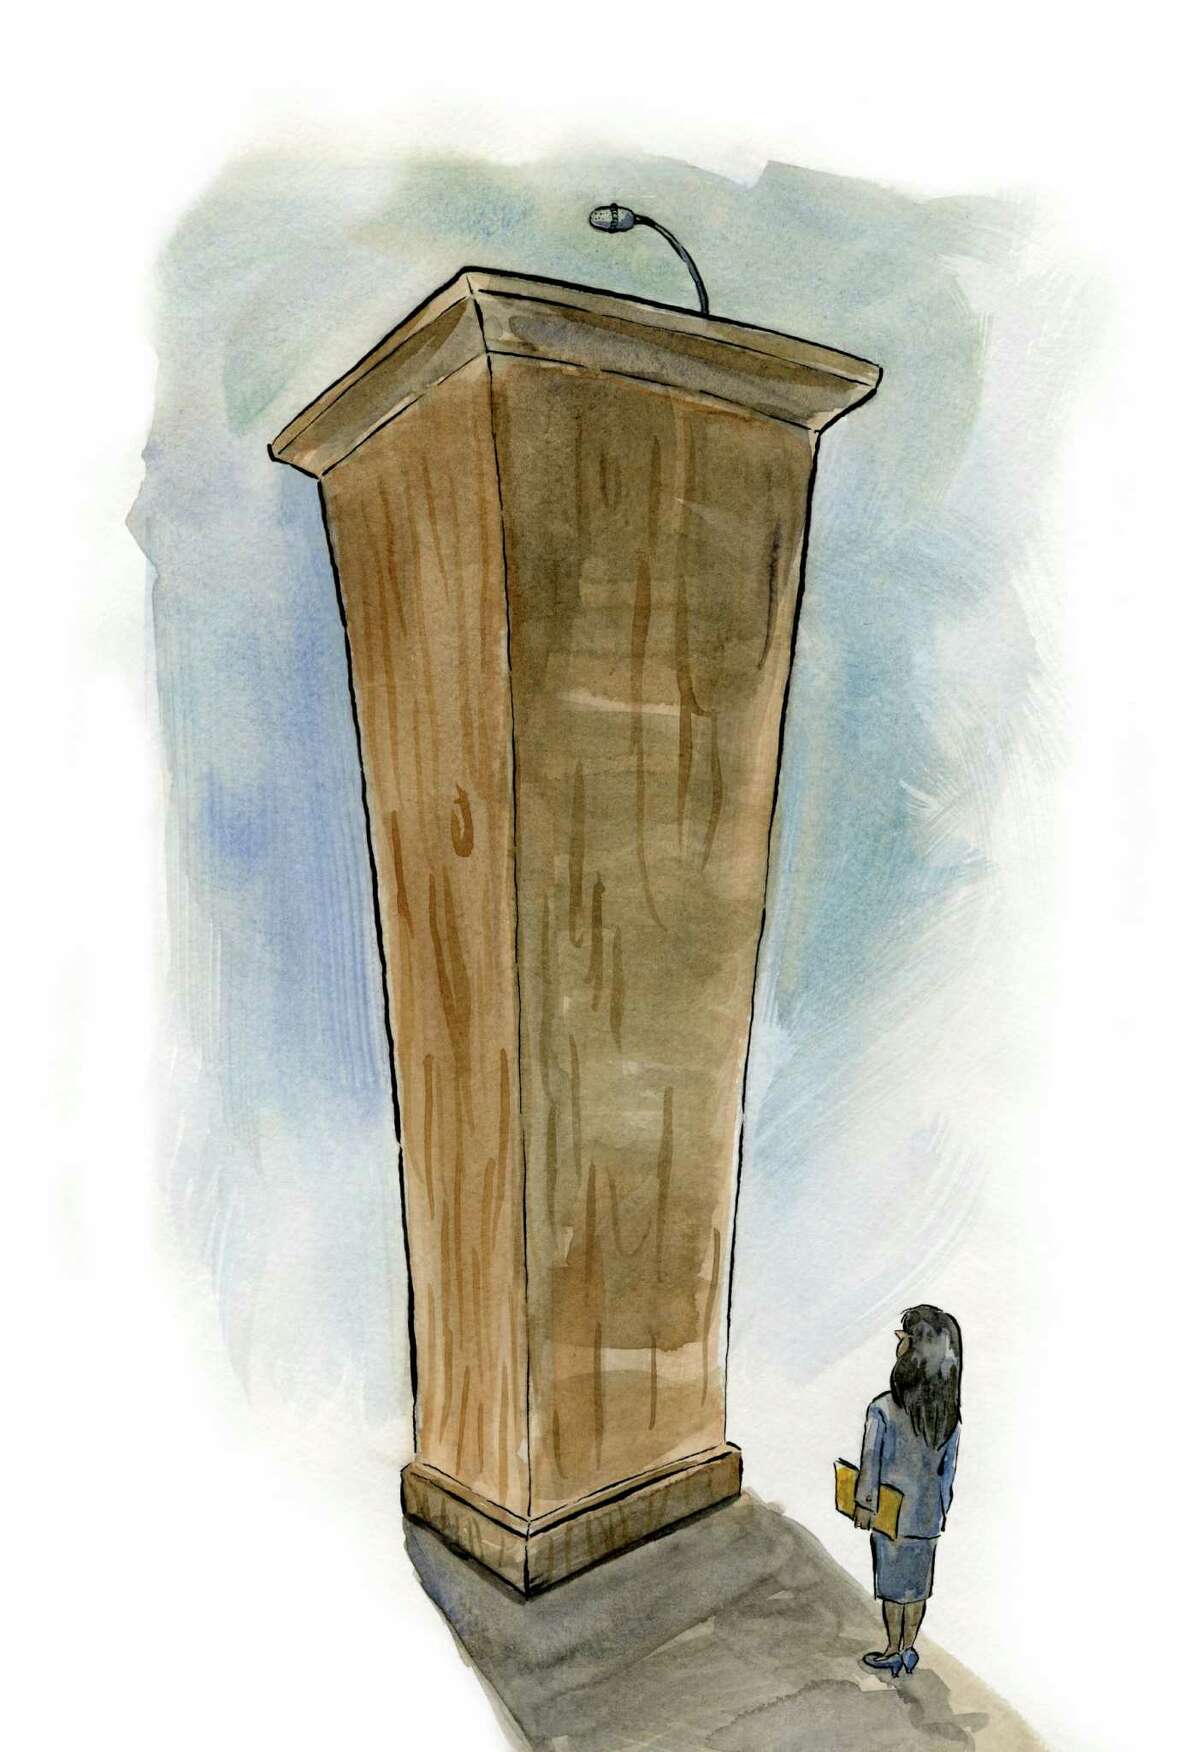 Illustration to go with public speaking worklife story. Illustration by Tyswan Stewart / Times Union